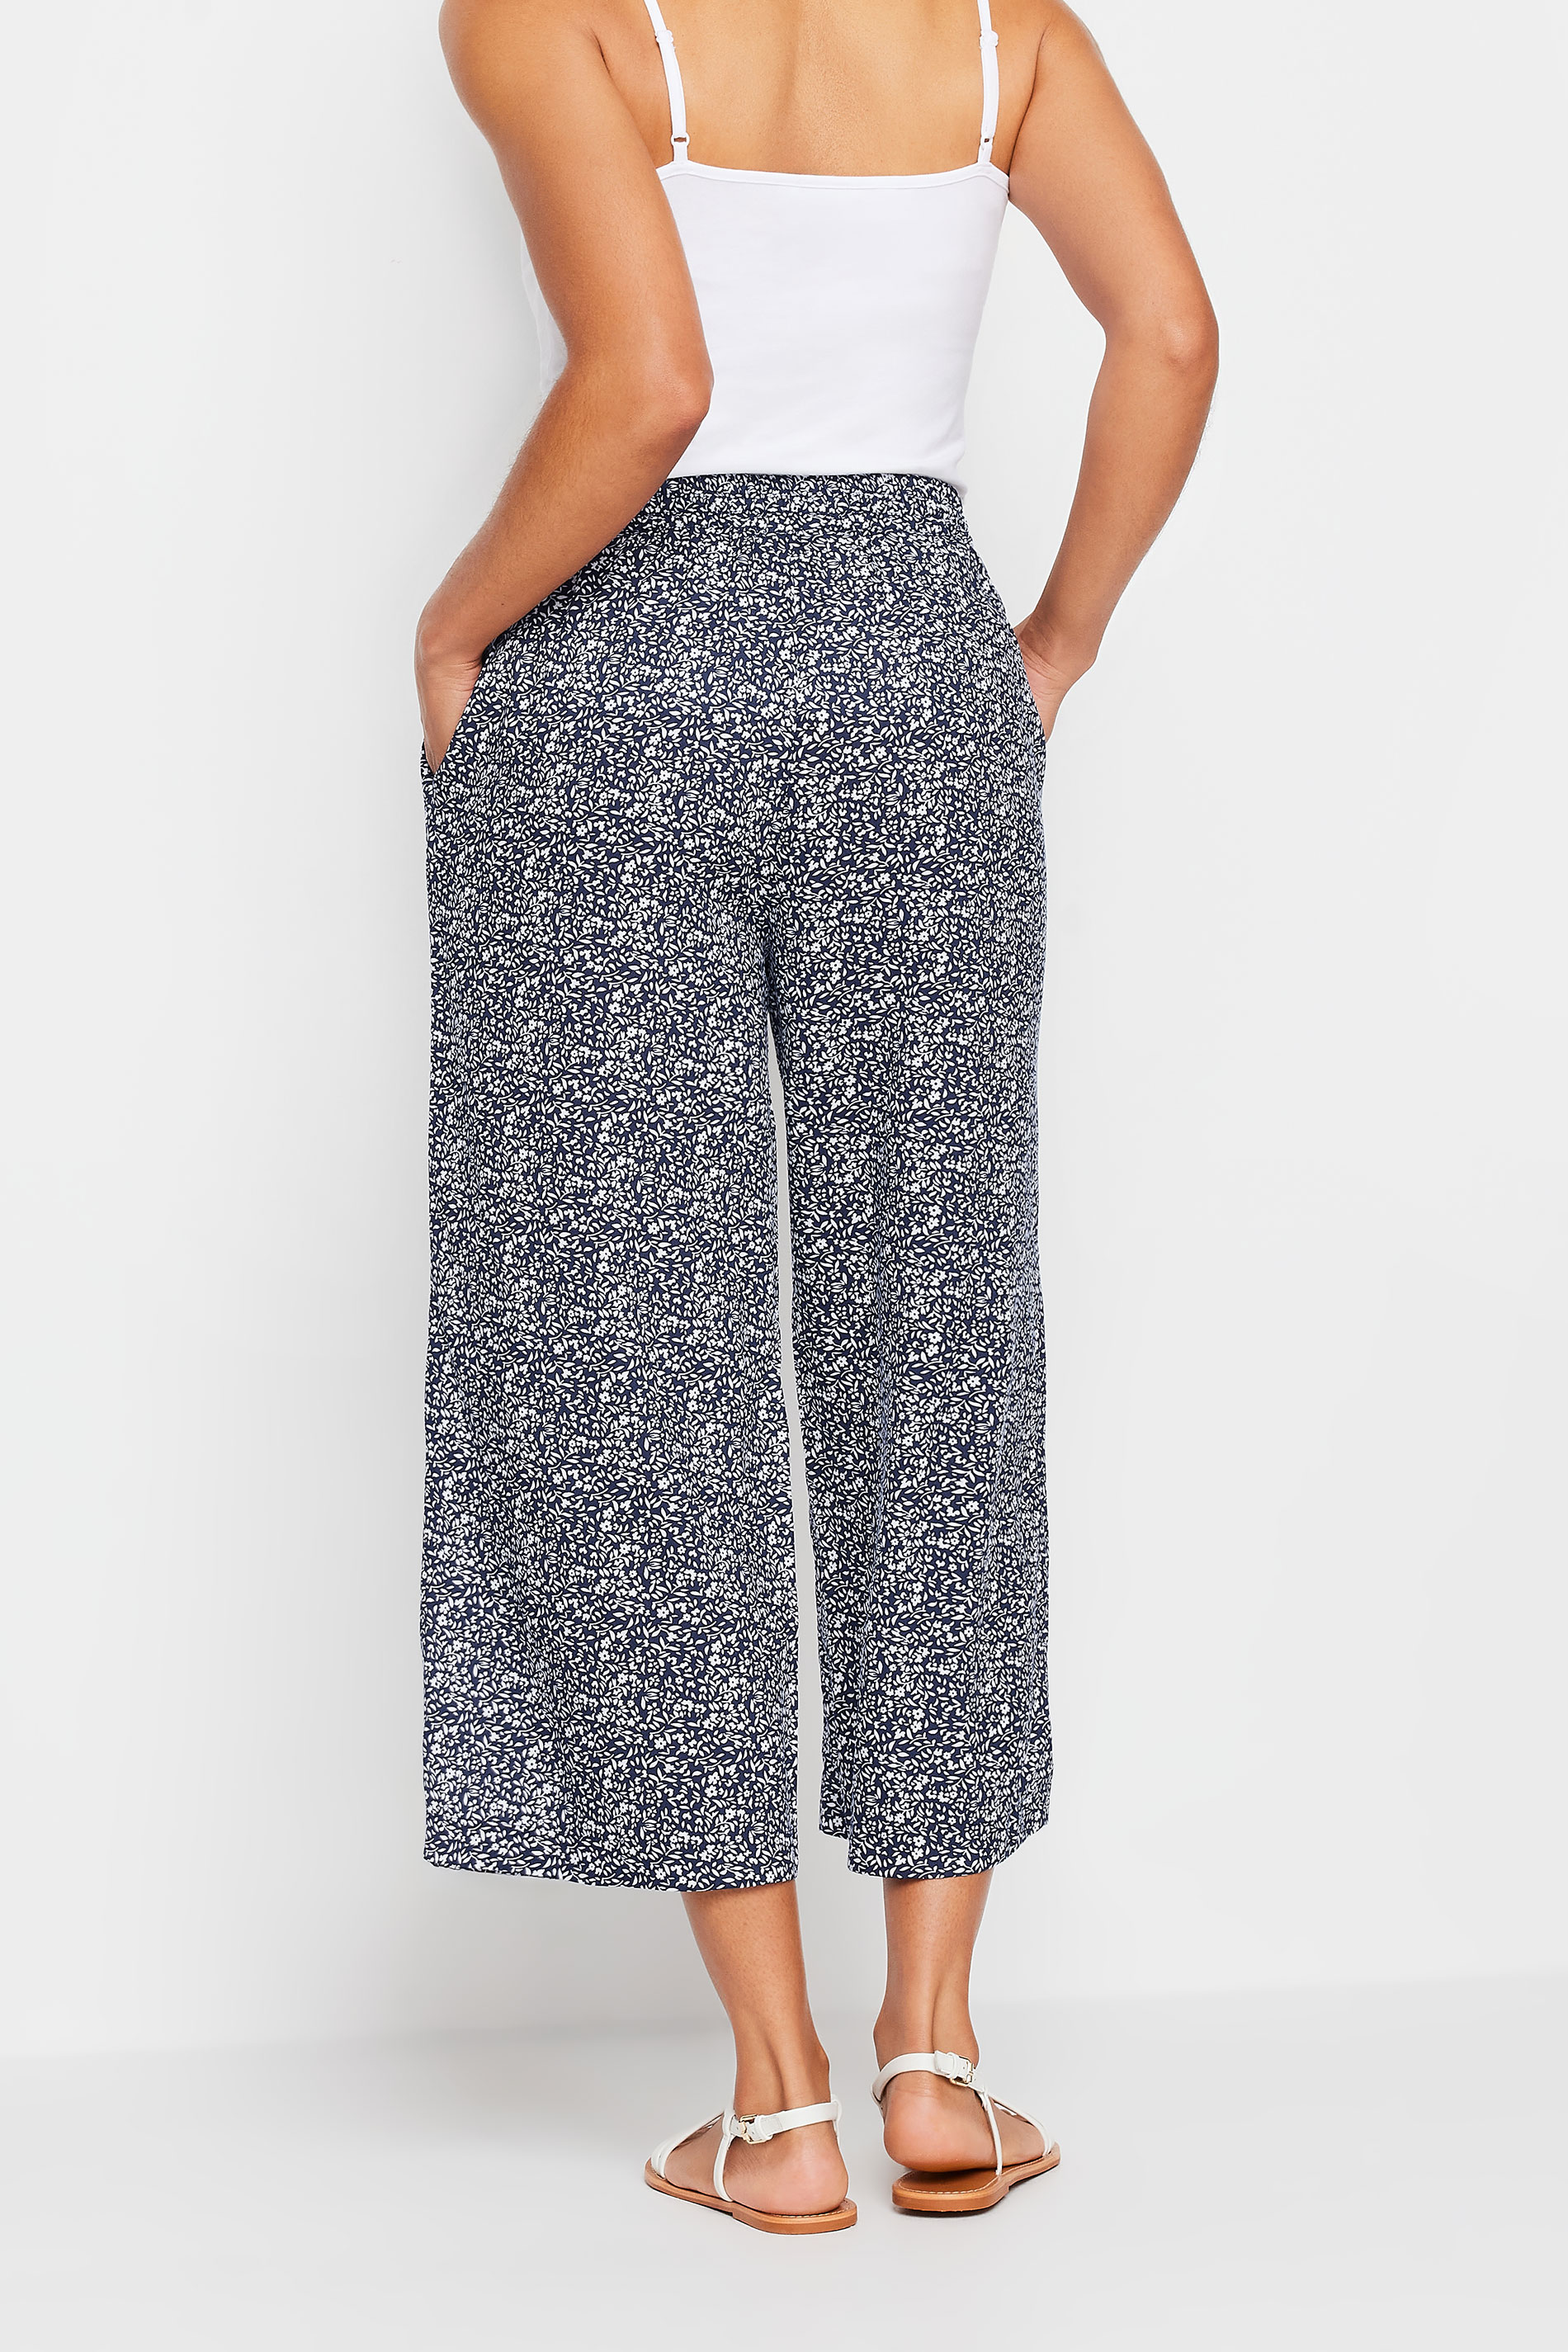 M&Co Navy Blue Ditsy Floral Culottes | M&Co 3